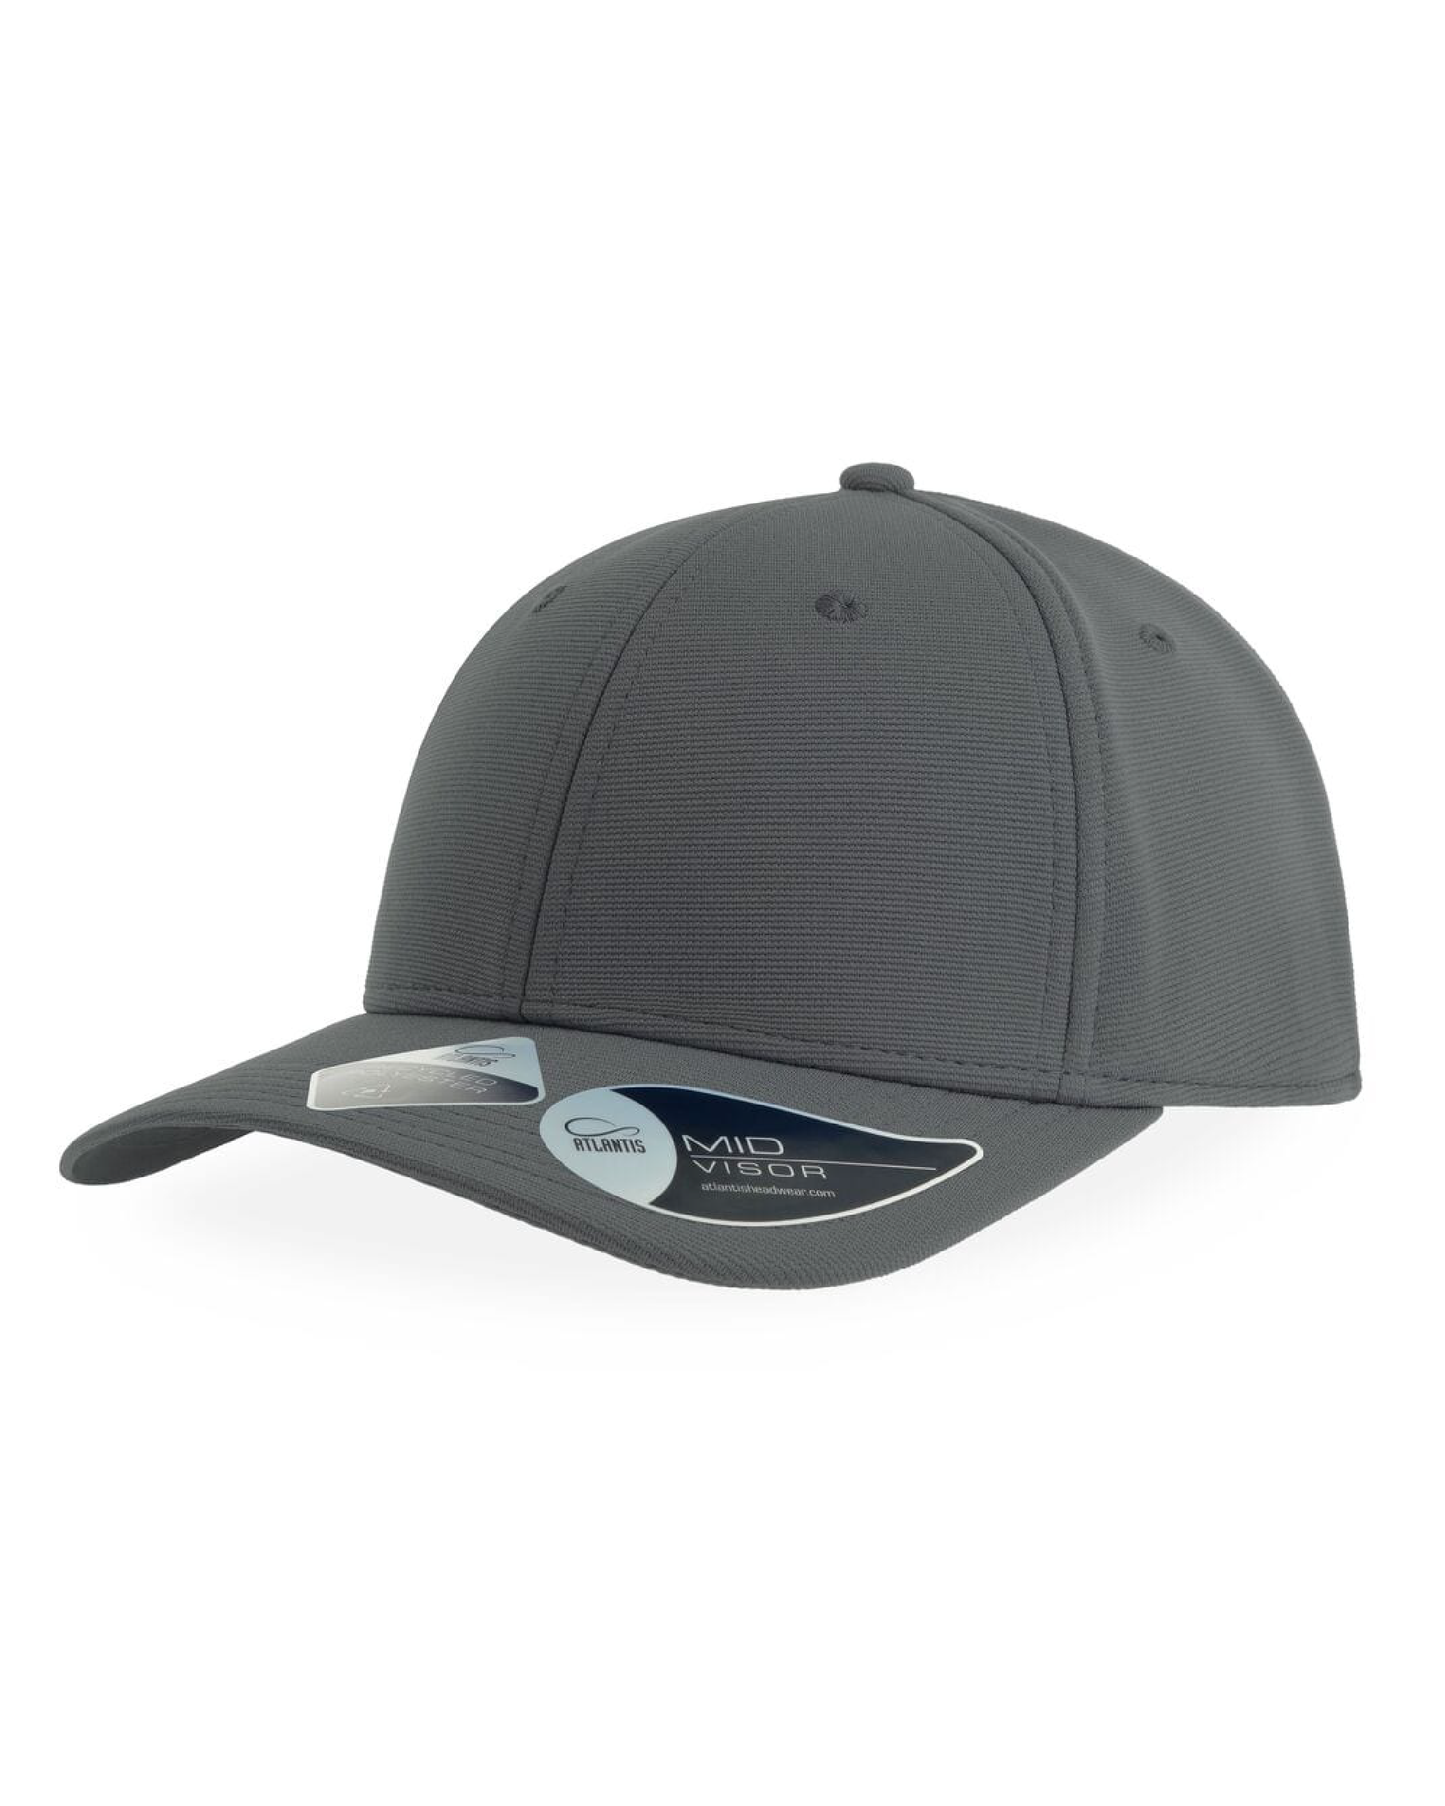 Gorra Recycled Polyester 6 Panels "TRR" (One Size) - Grey